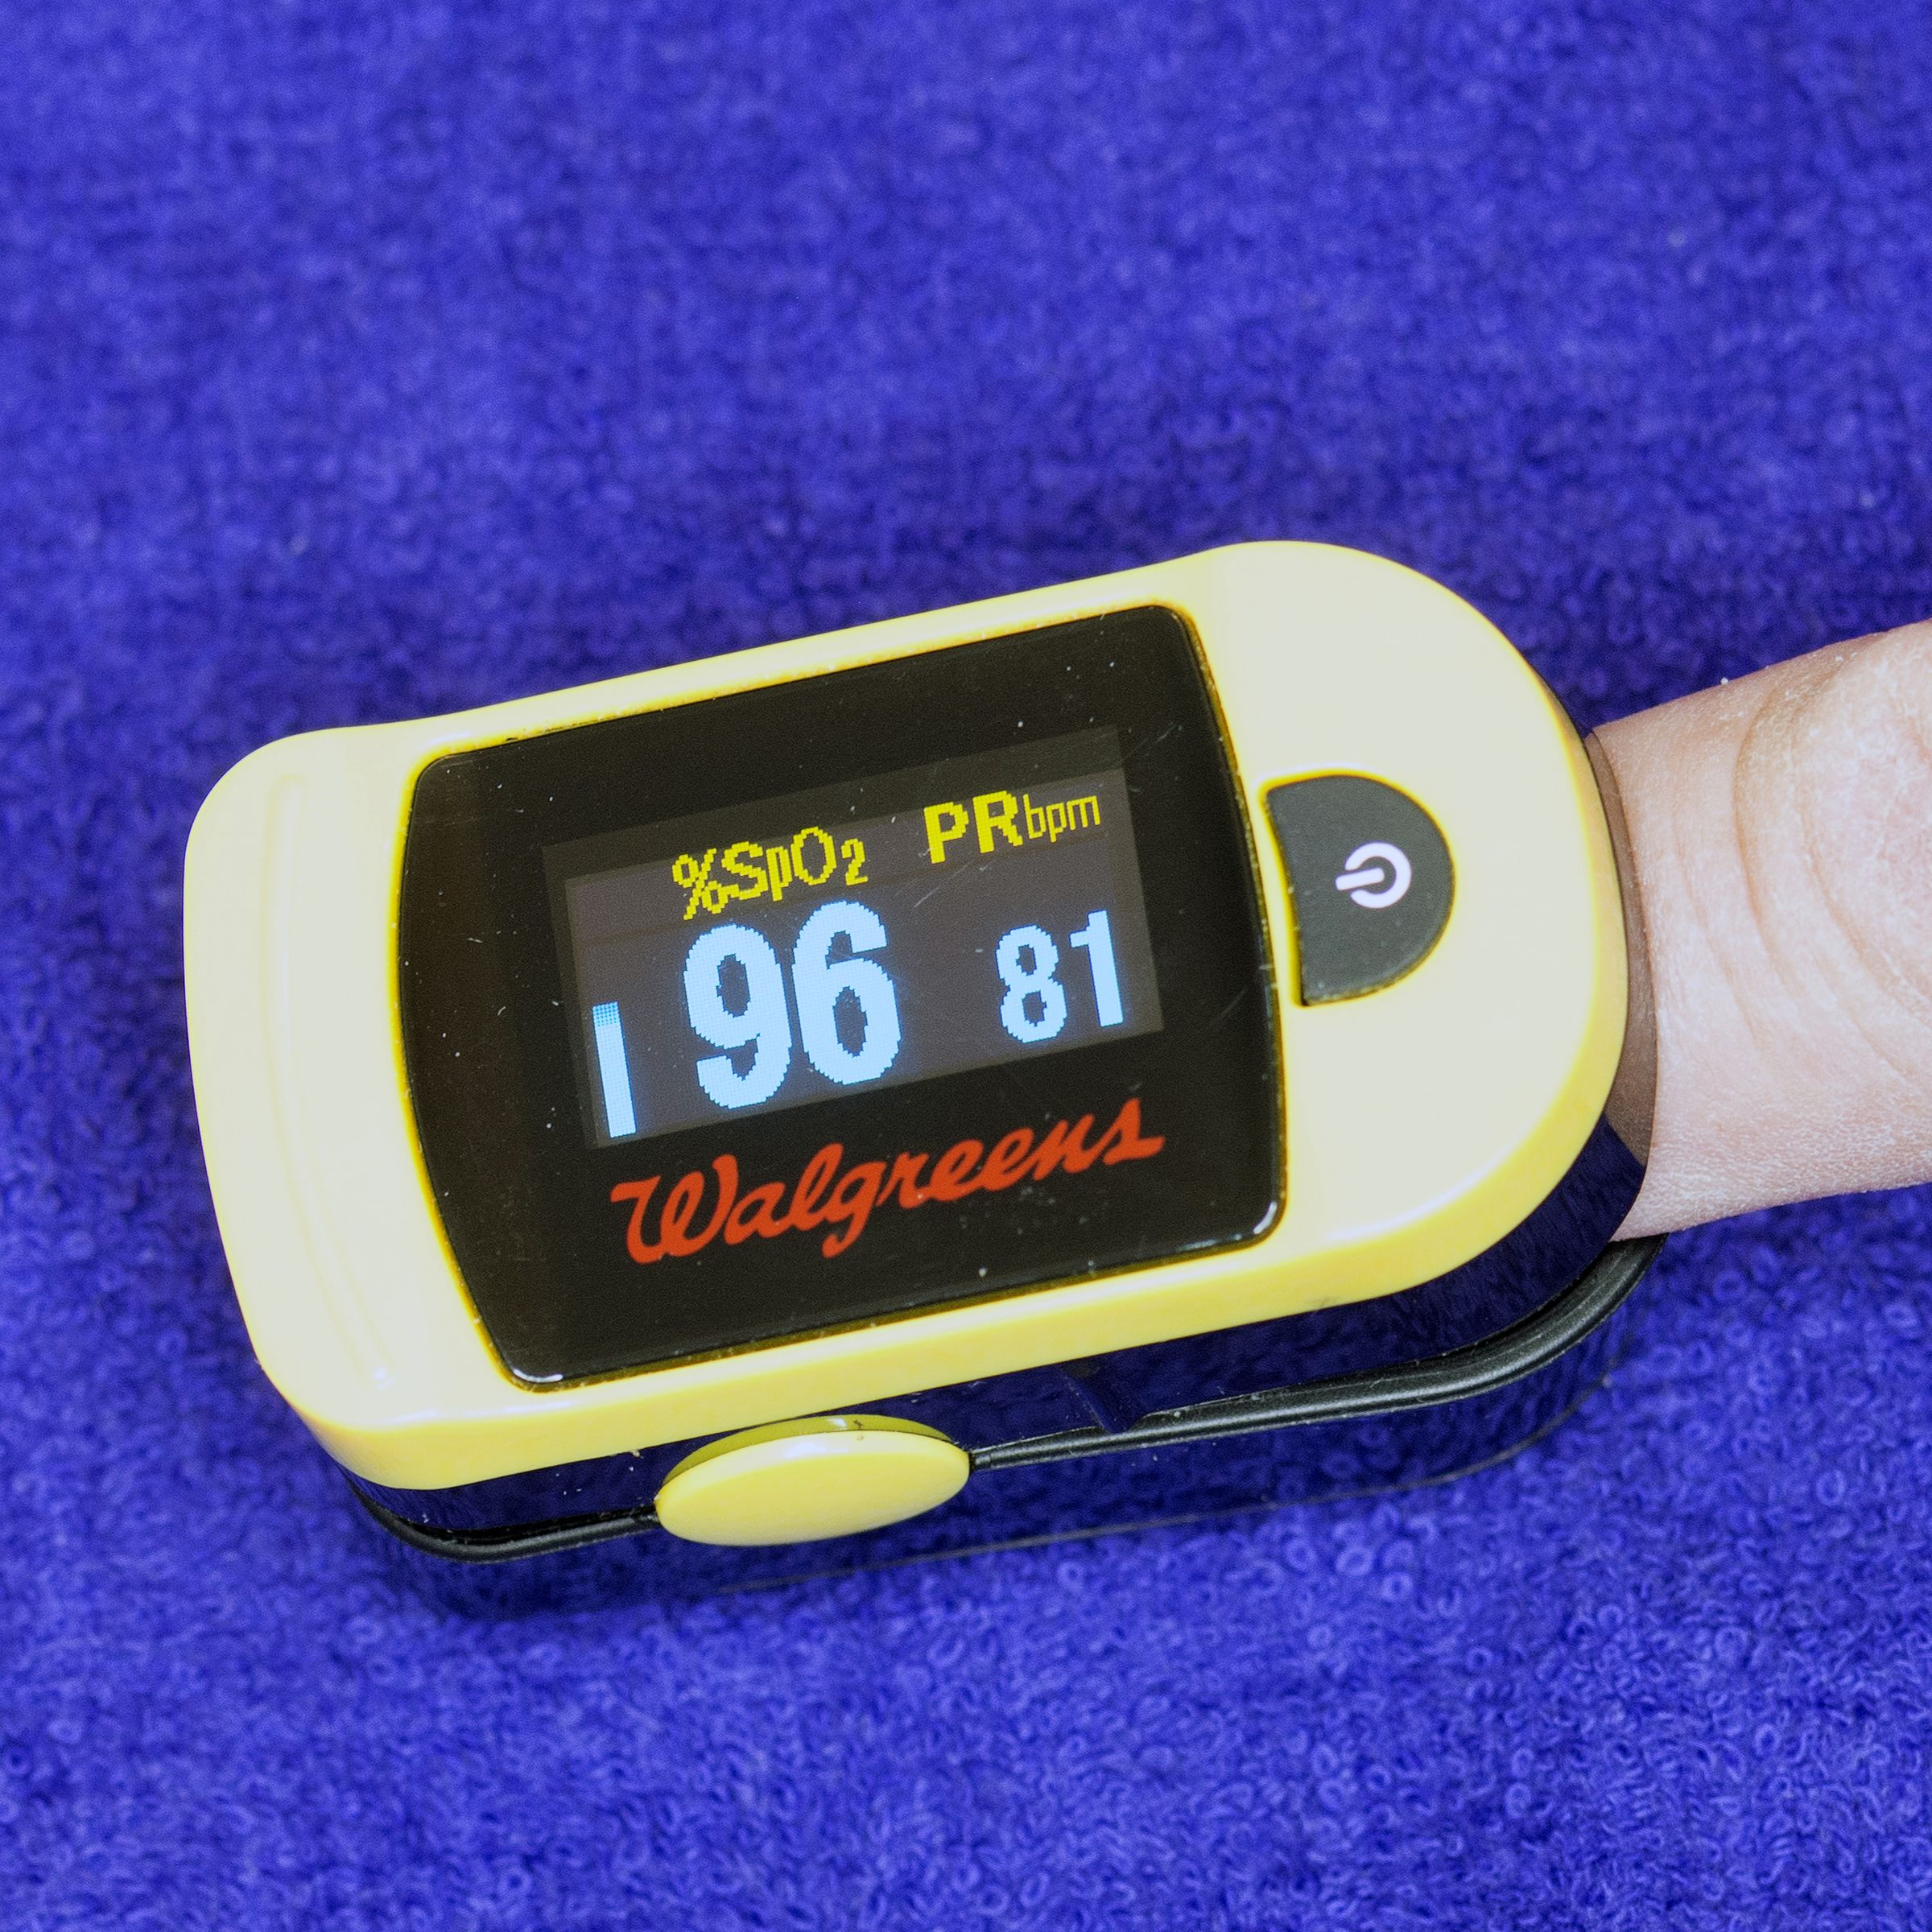 Pulse oximeter with the Walgreens logo clipped on a finger against a blue background.